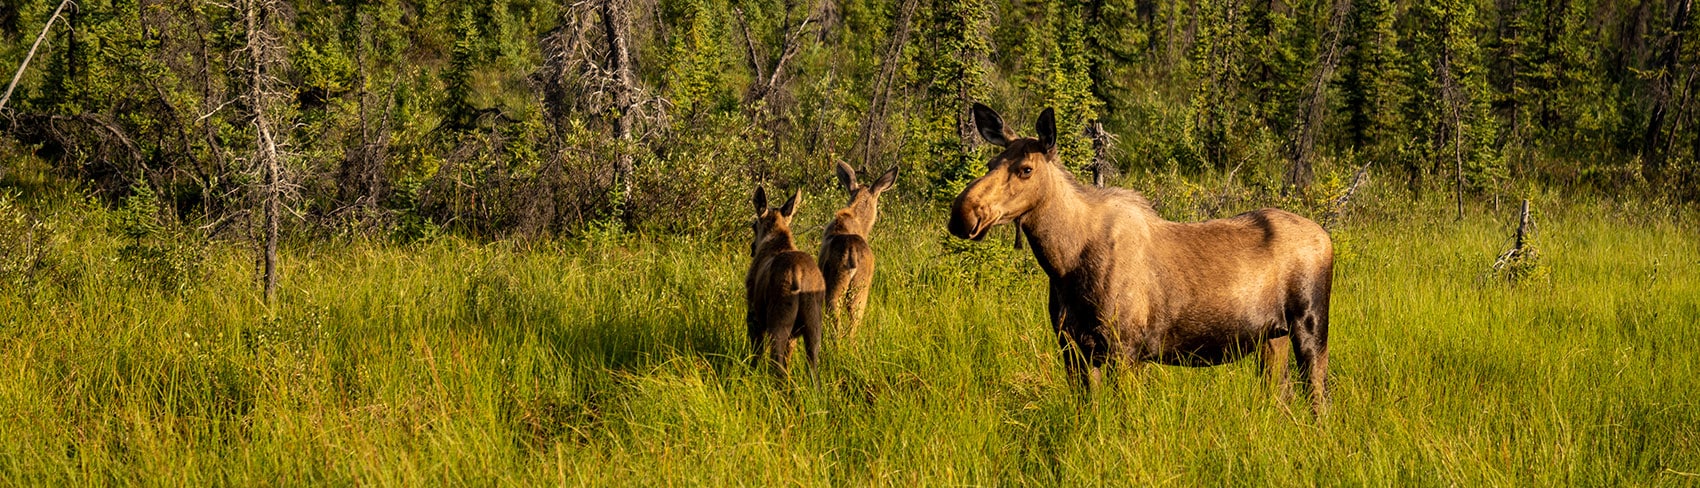 Mama moose and two babies in a field of grass.